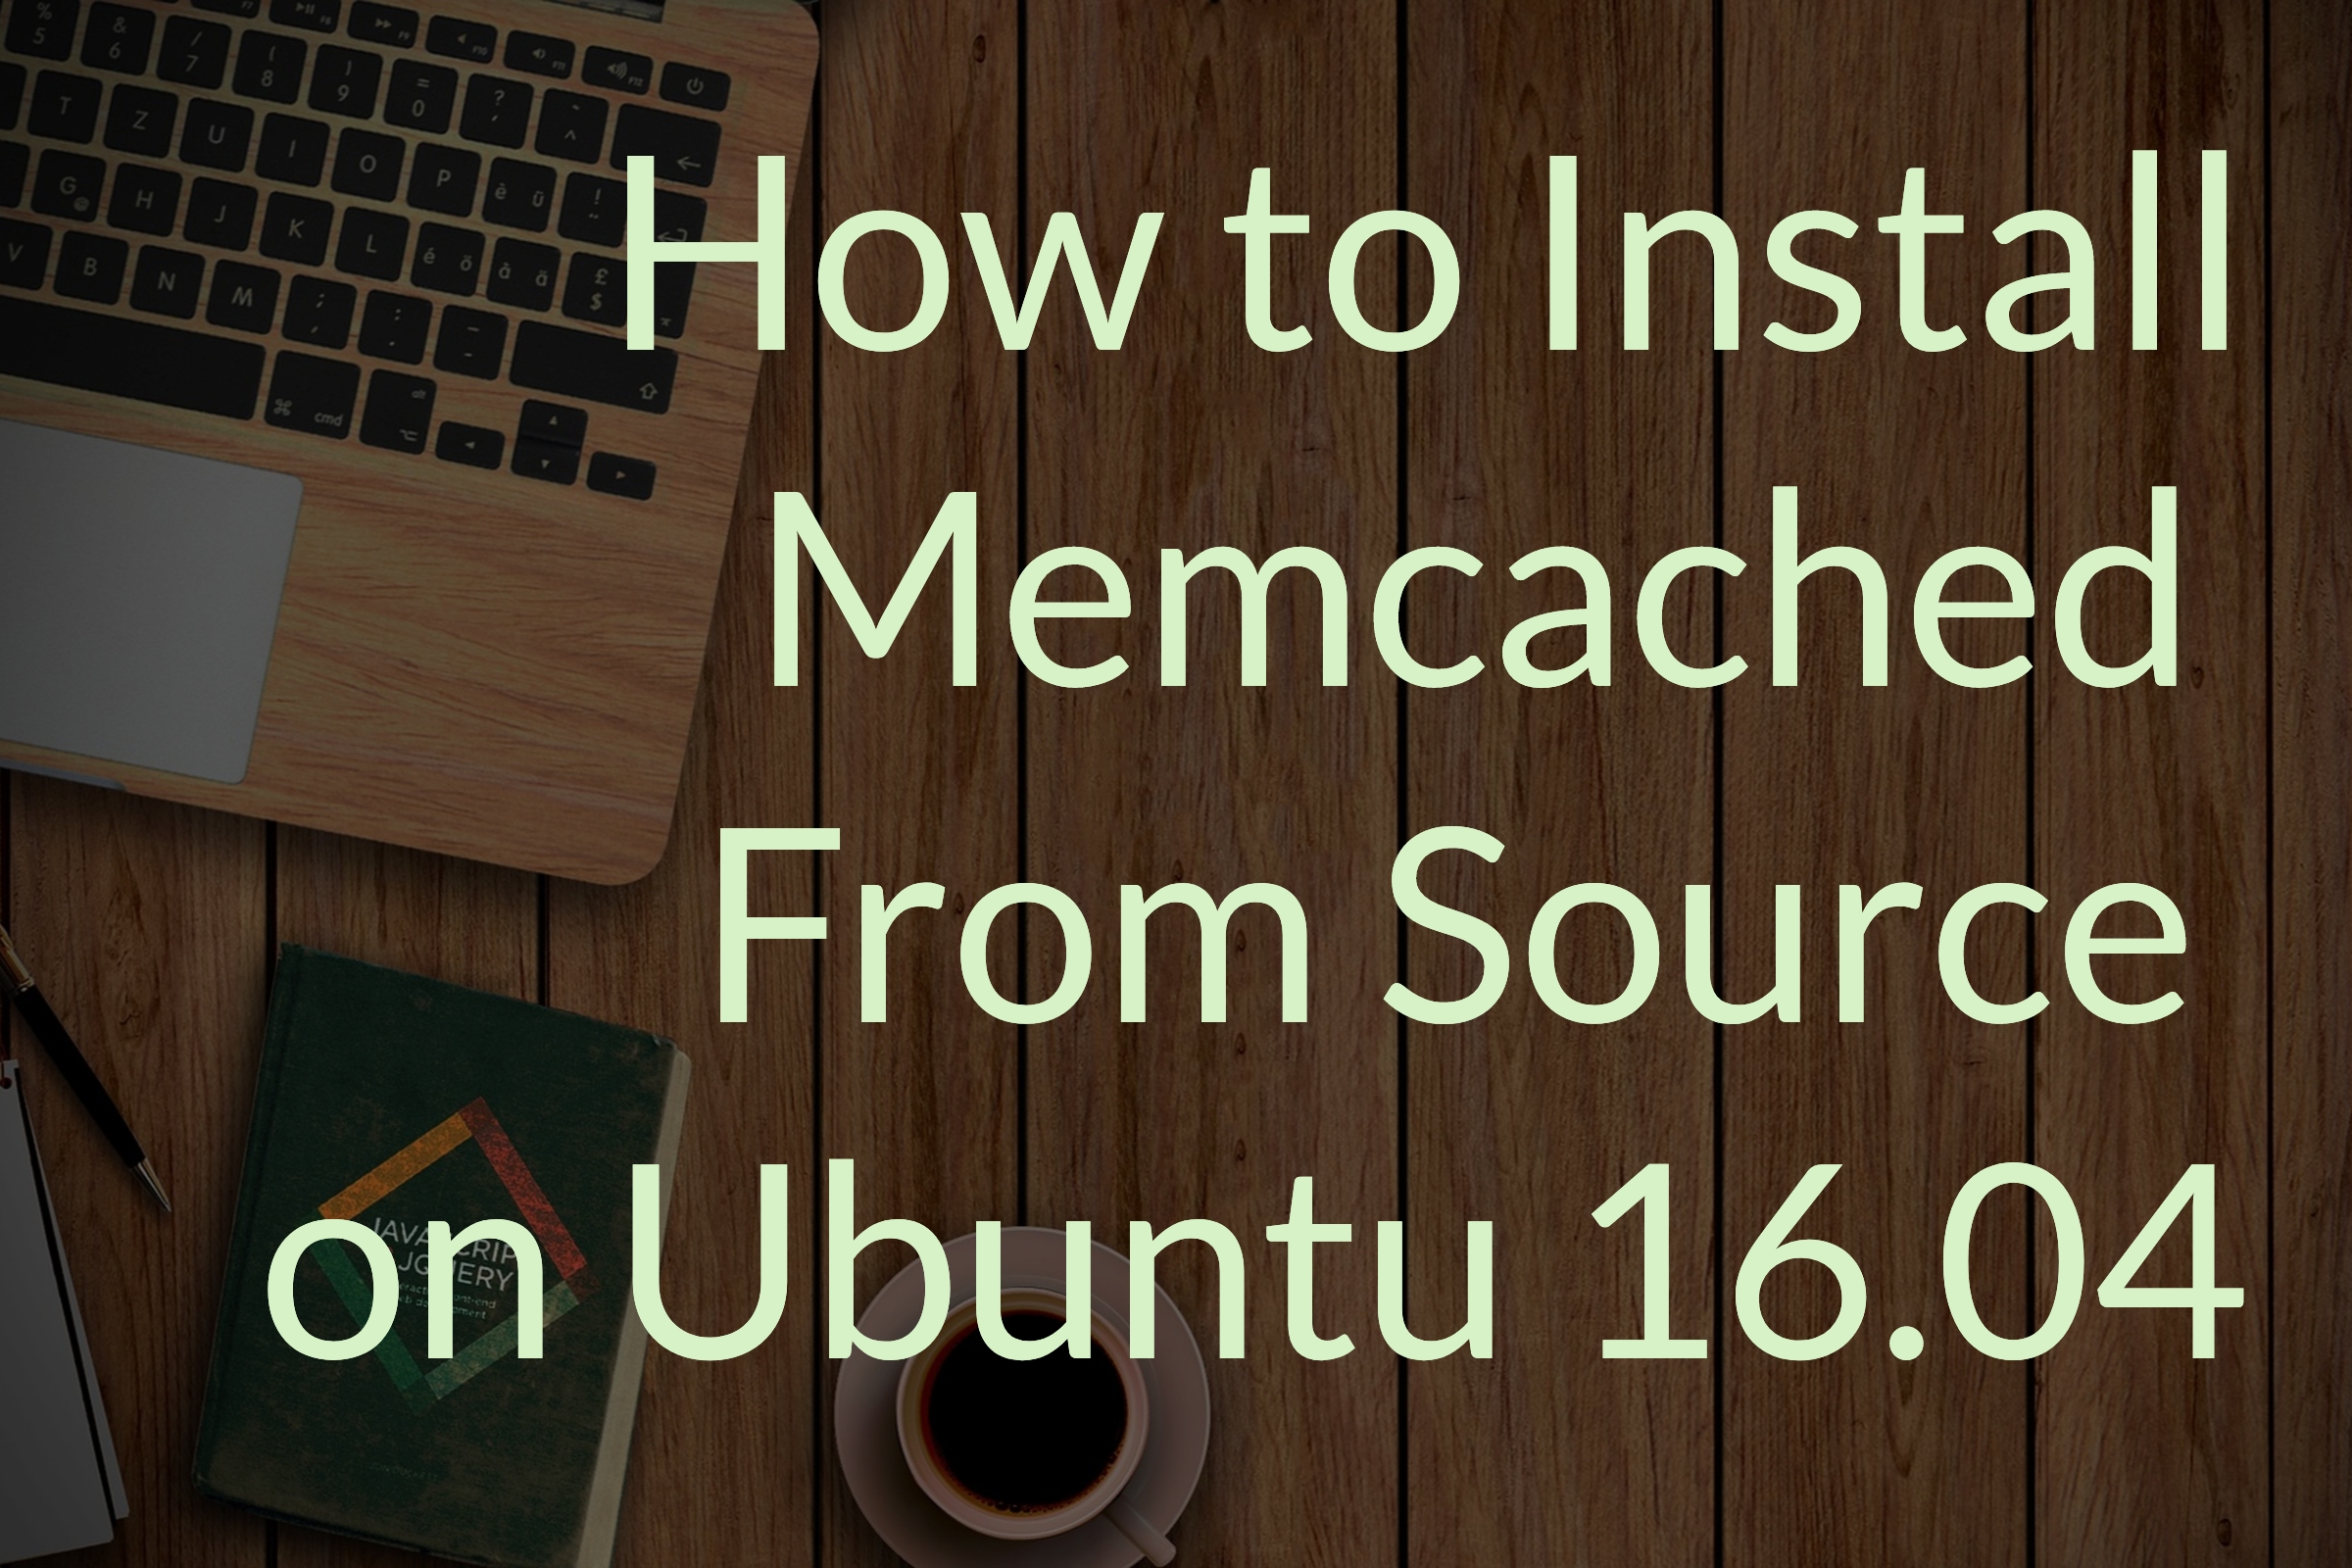 install-memcached-from-source-ubuntu-16.04